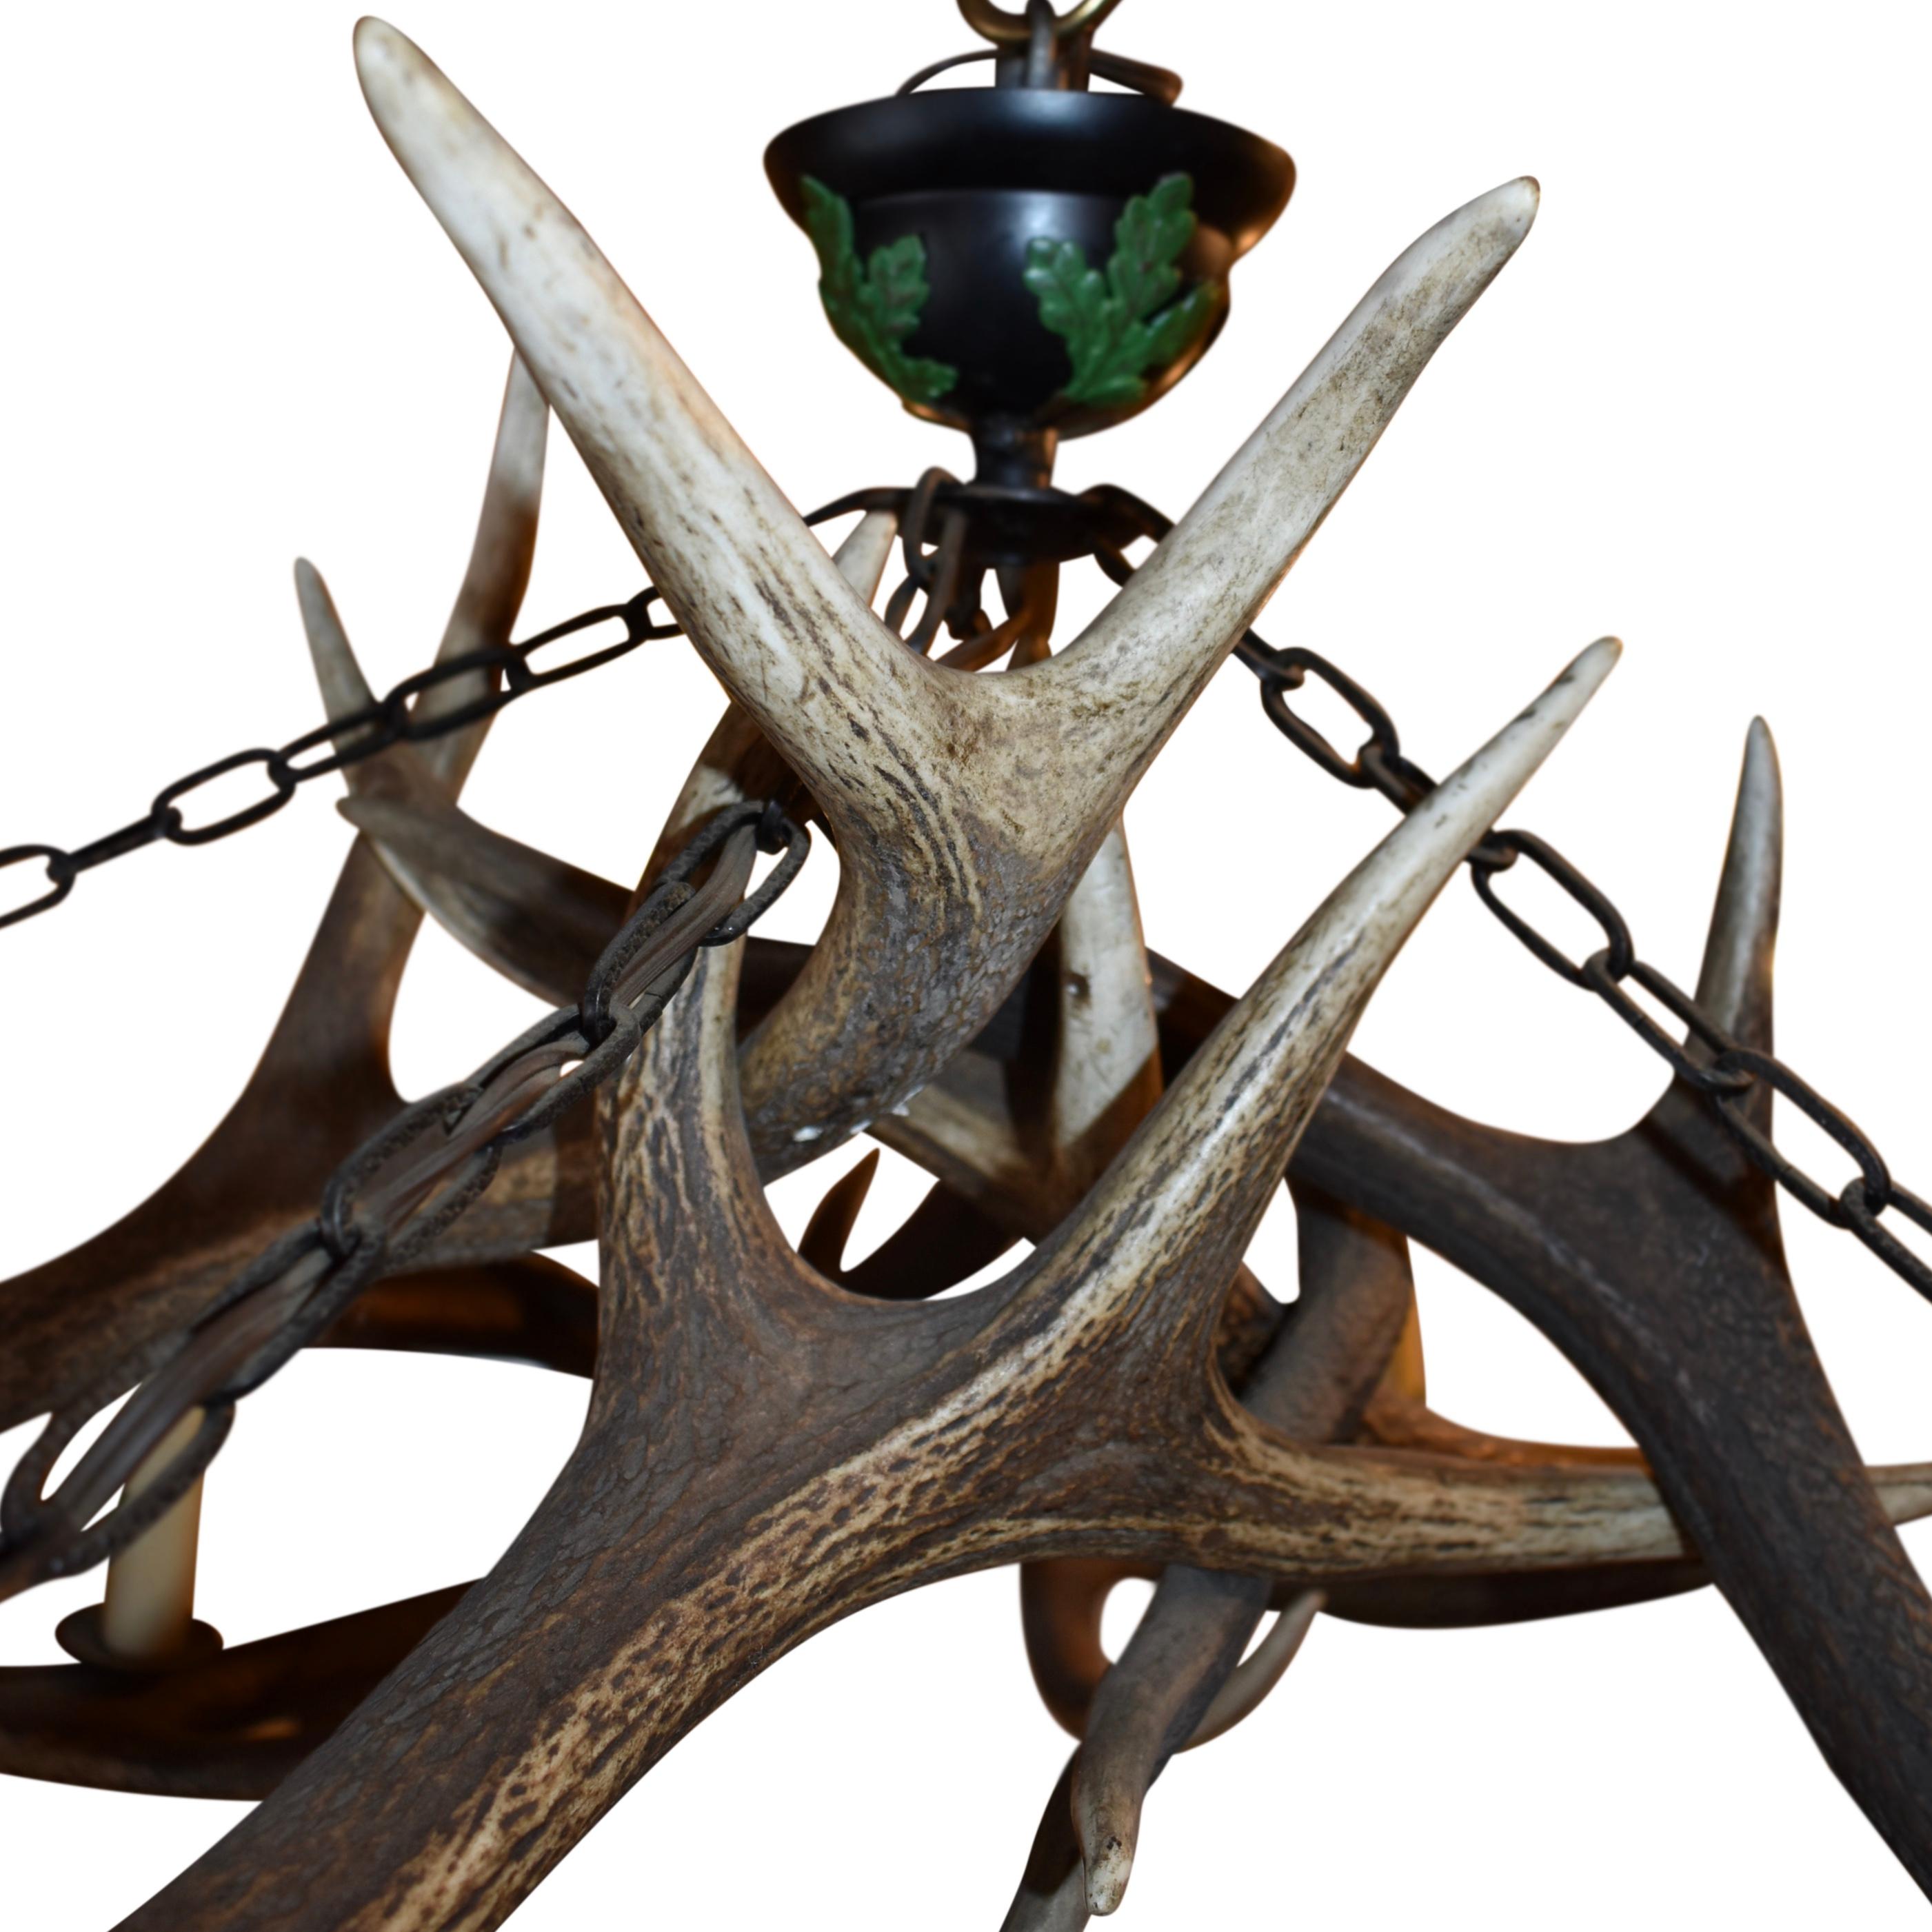 Custom made from nine red stag antlers, this beautiful chandelier features five candleholders and five faux candles. The candle holders extending from the coronets of the five outer antlers. Decorative green leaves on the faux candles and black